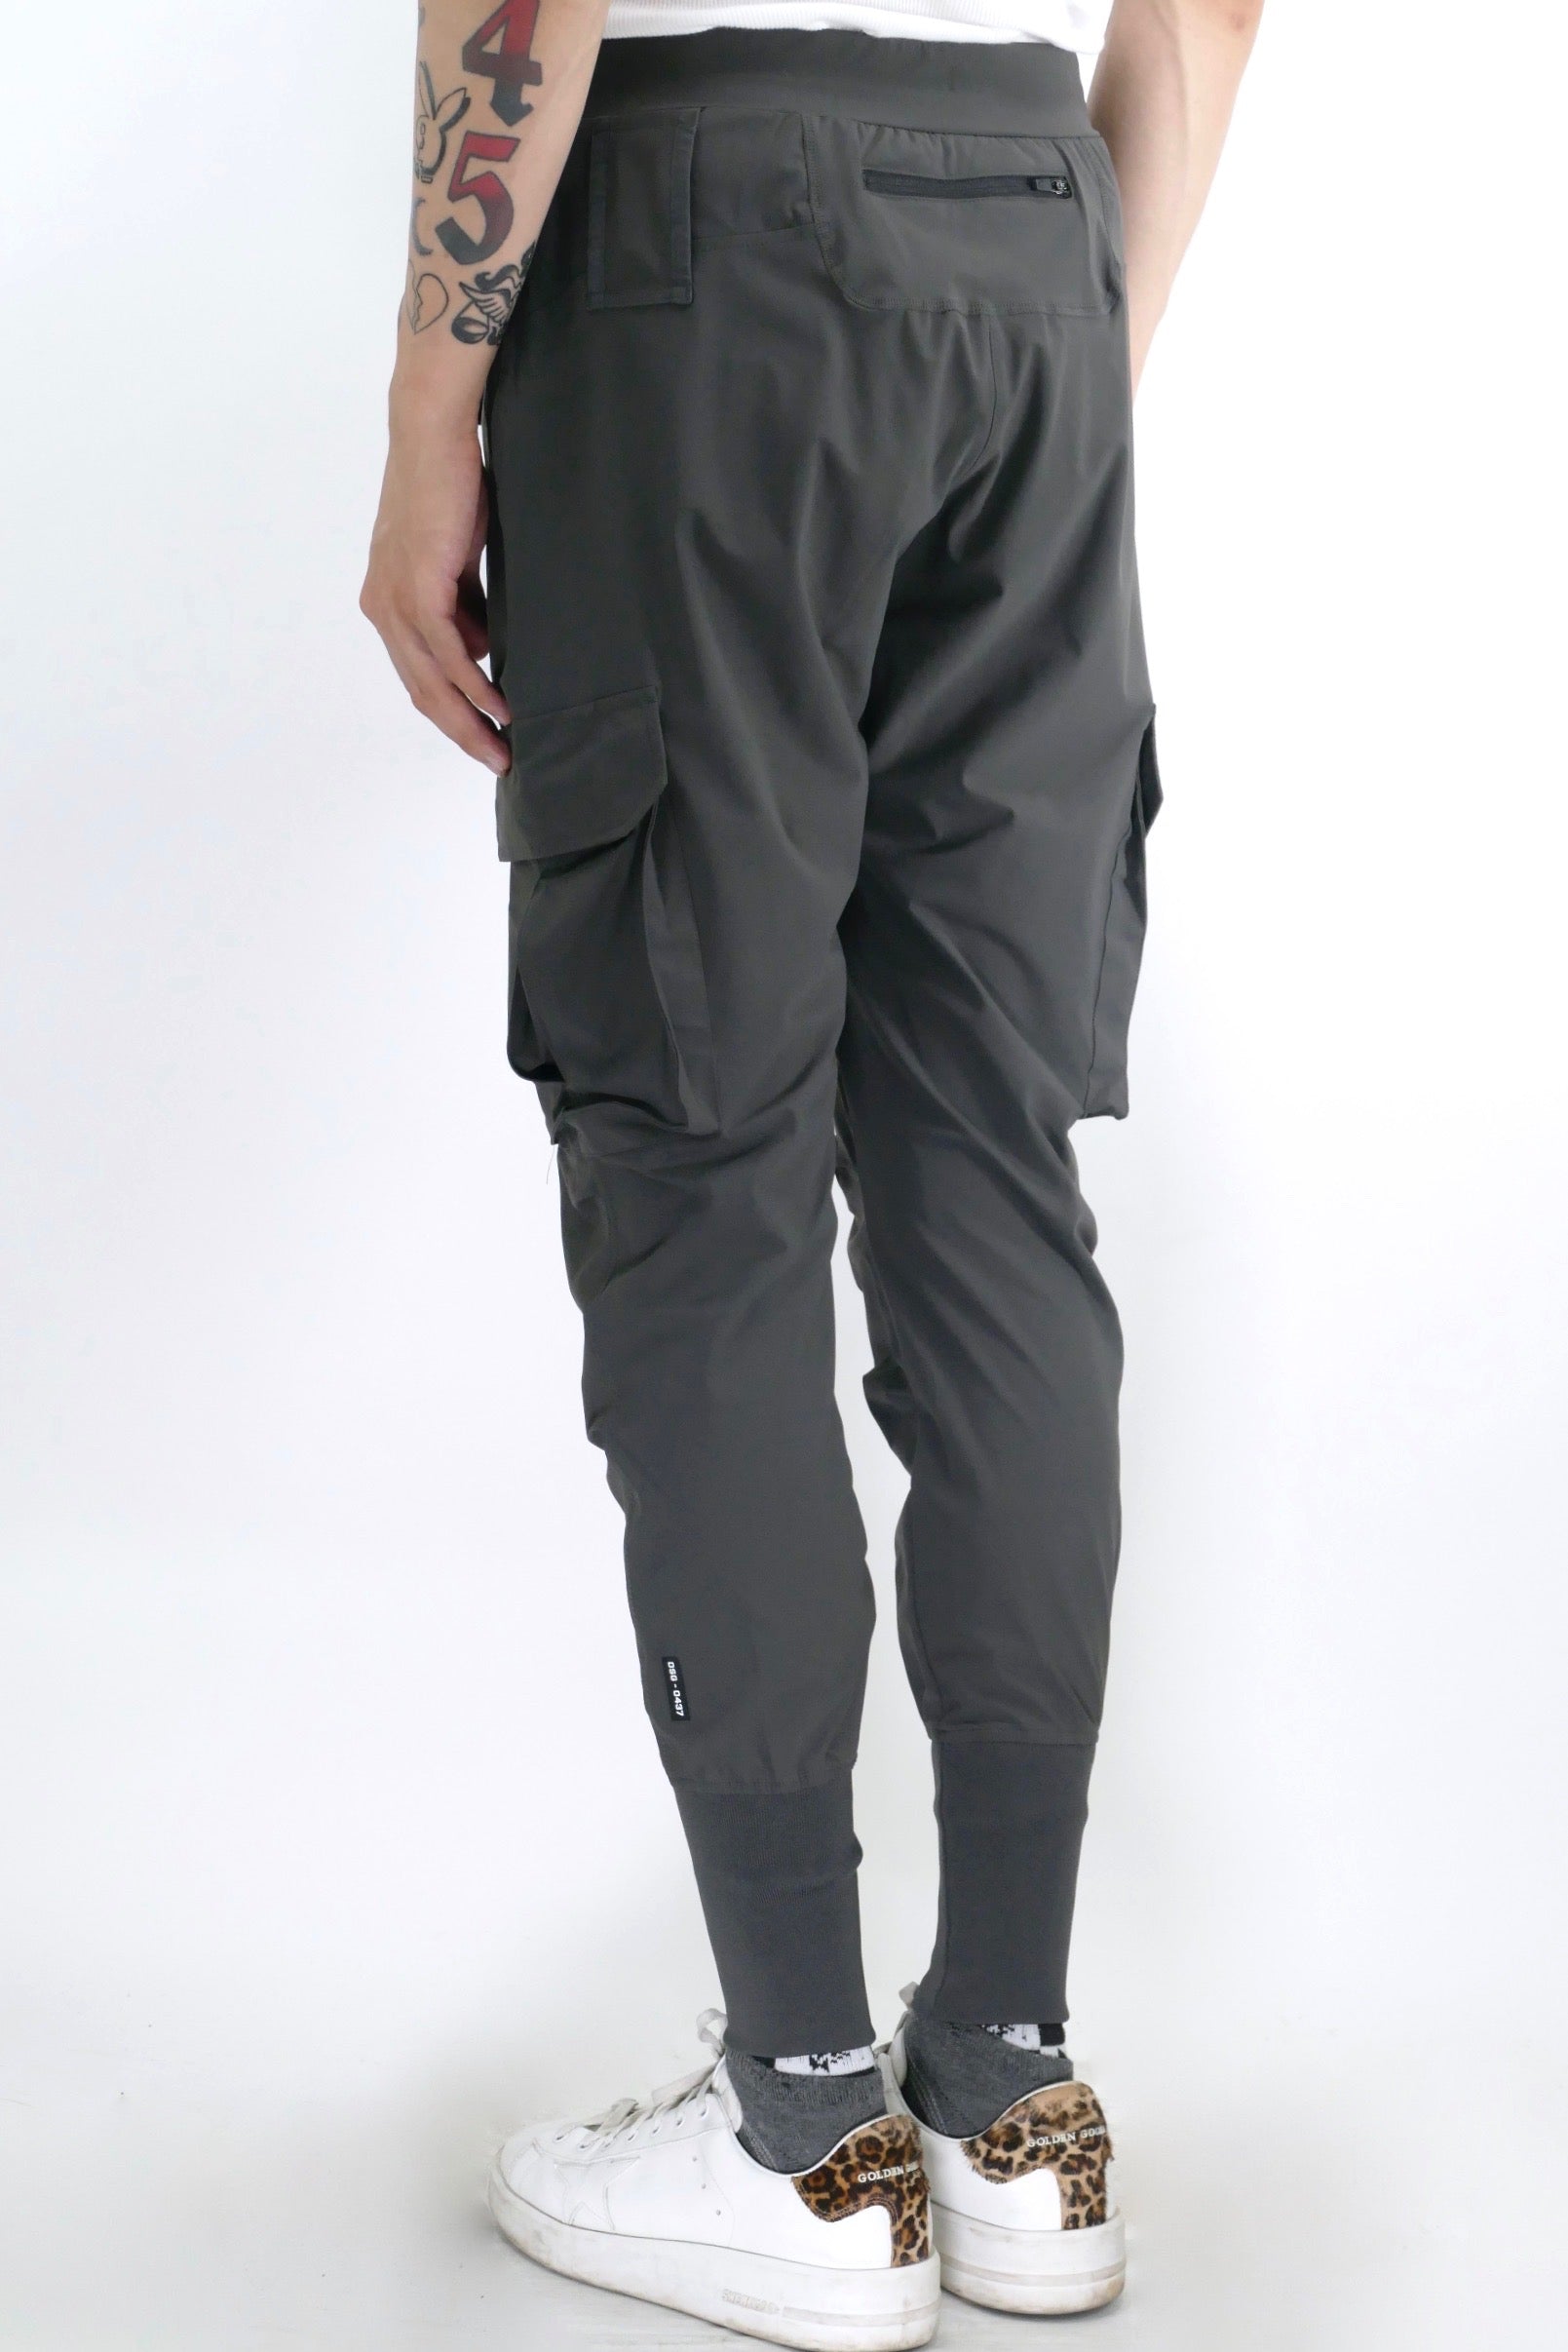 Time 2 Get Lit Reflective Cargo Joggers – iHeartRaves